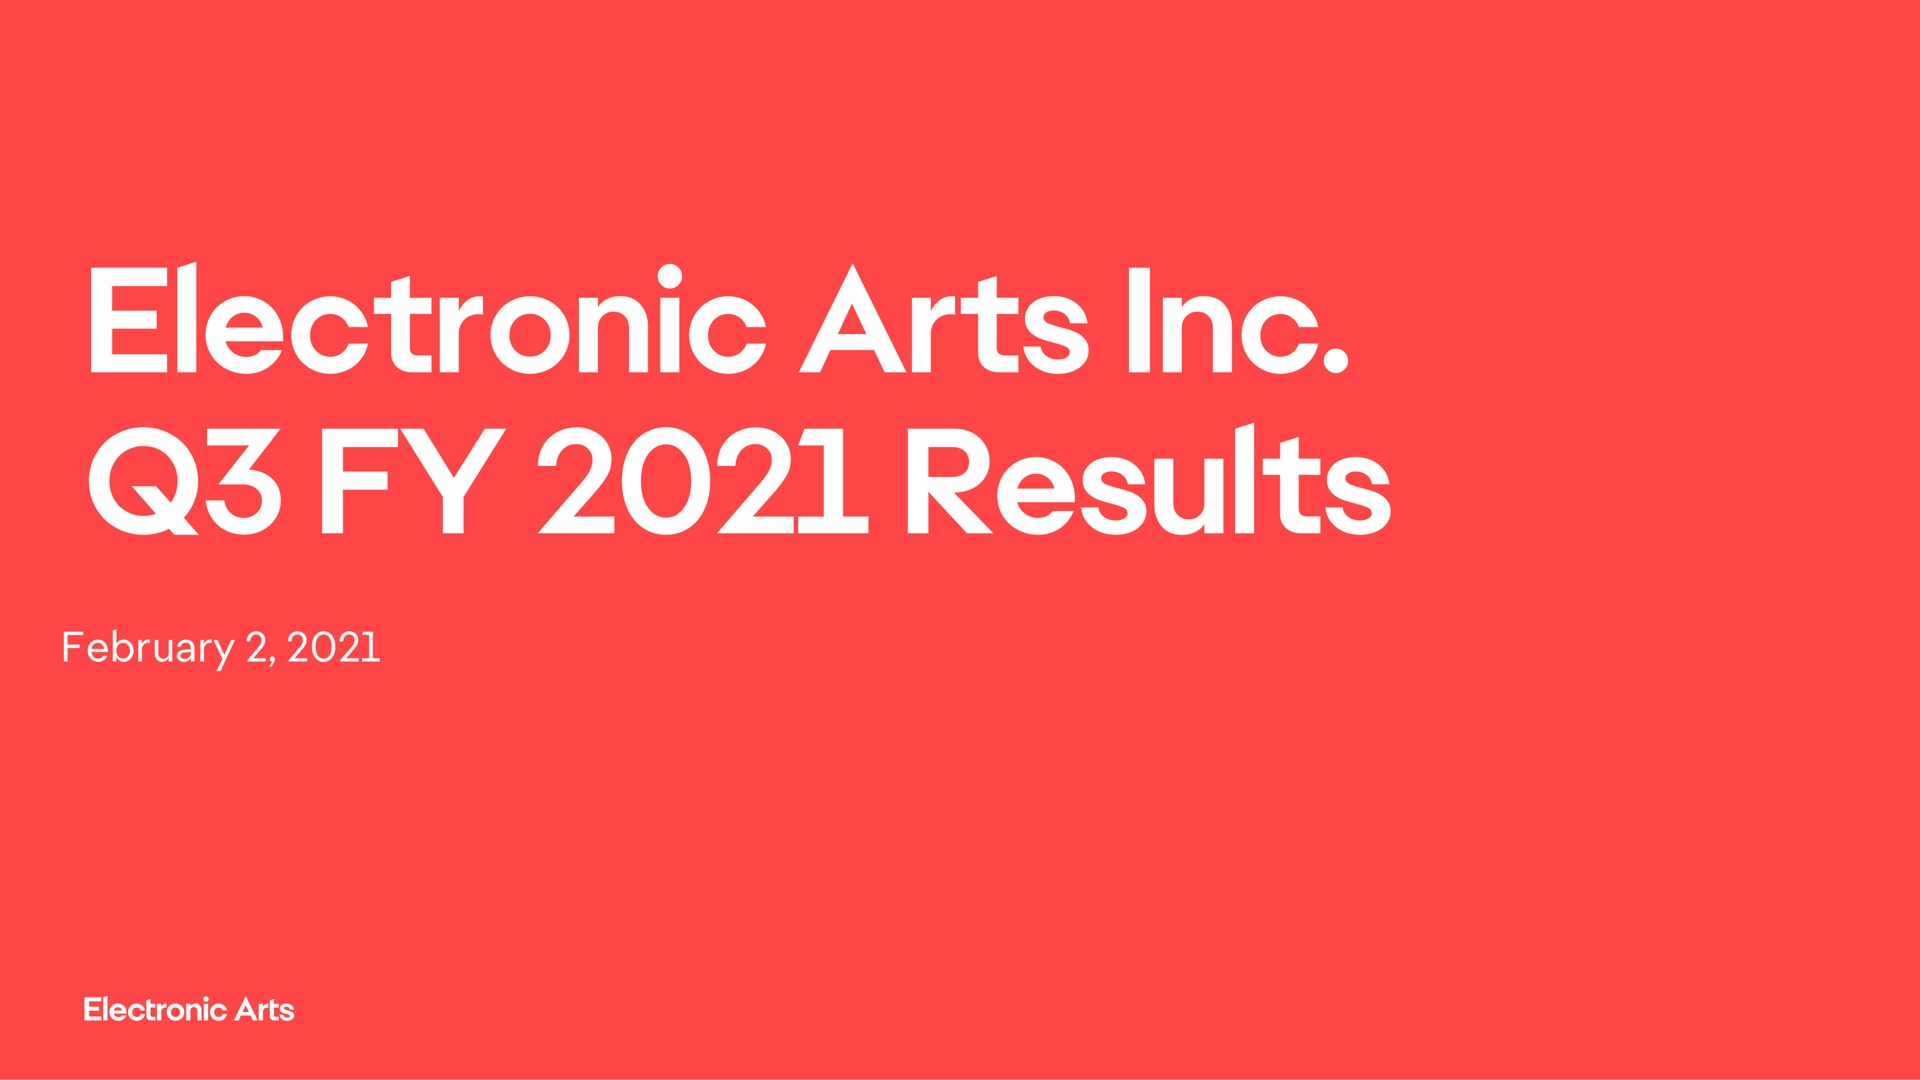 electronic arts results | Electronic Arts